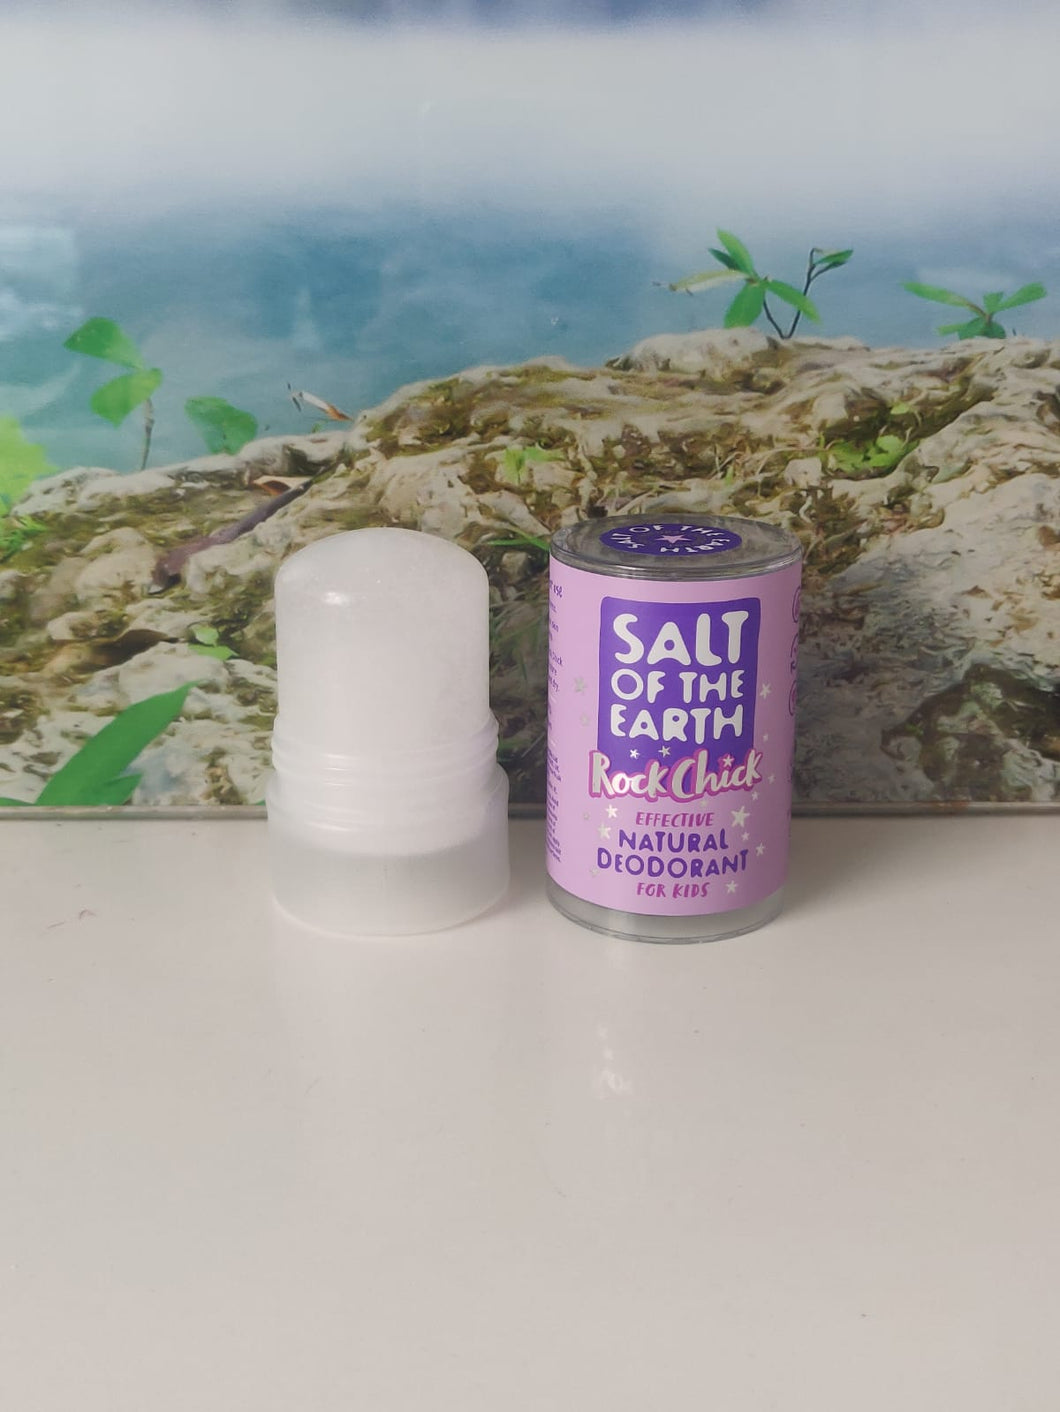 Salt of the Earth Rock Chick Deodorant for Kids